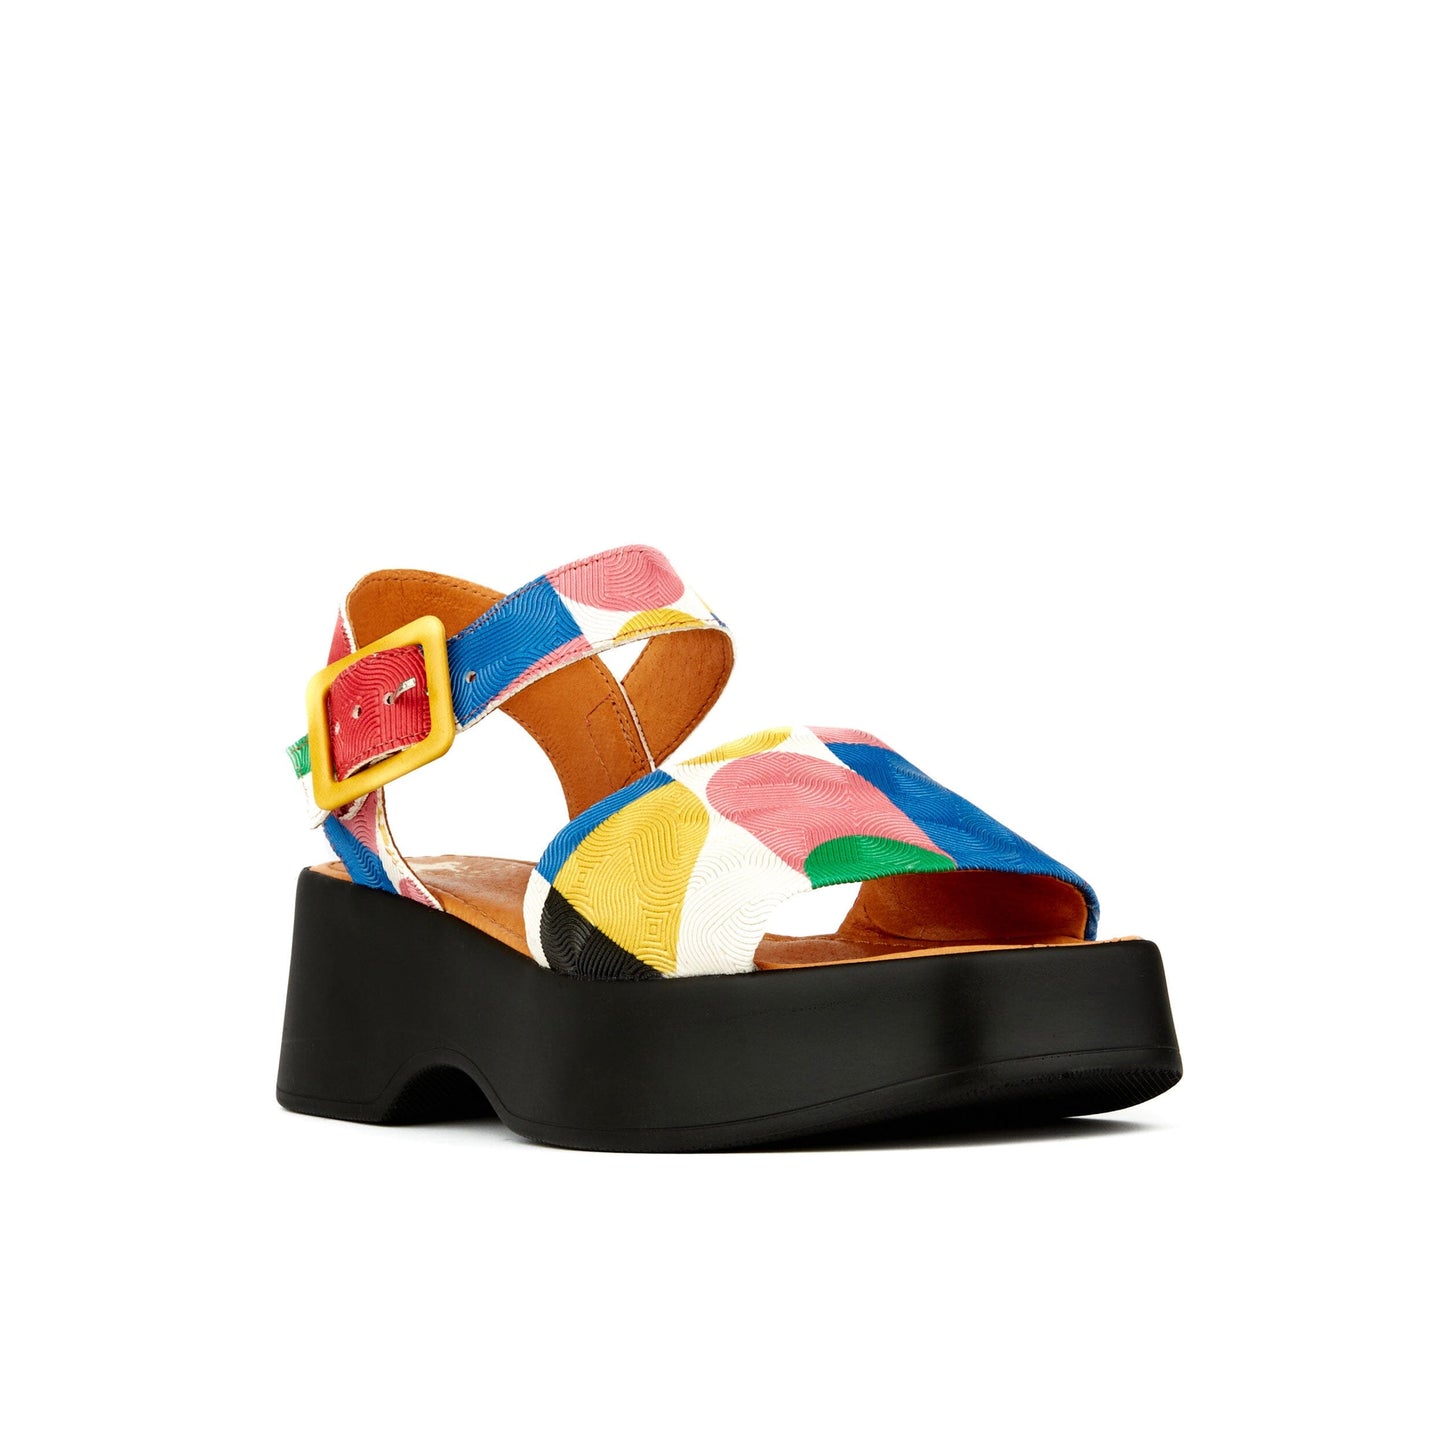 Stacey - Groovy Womens Sandals Embassy London 